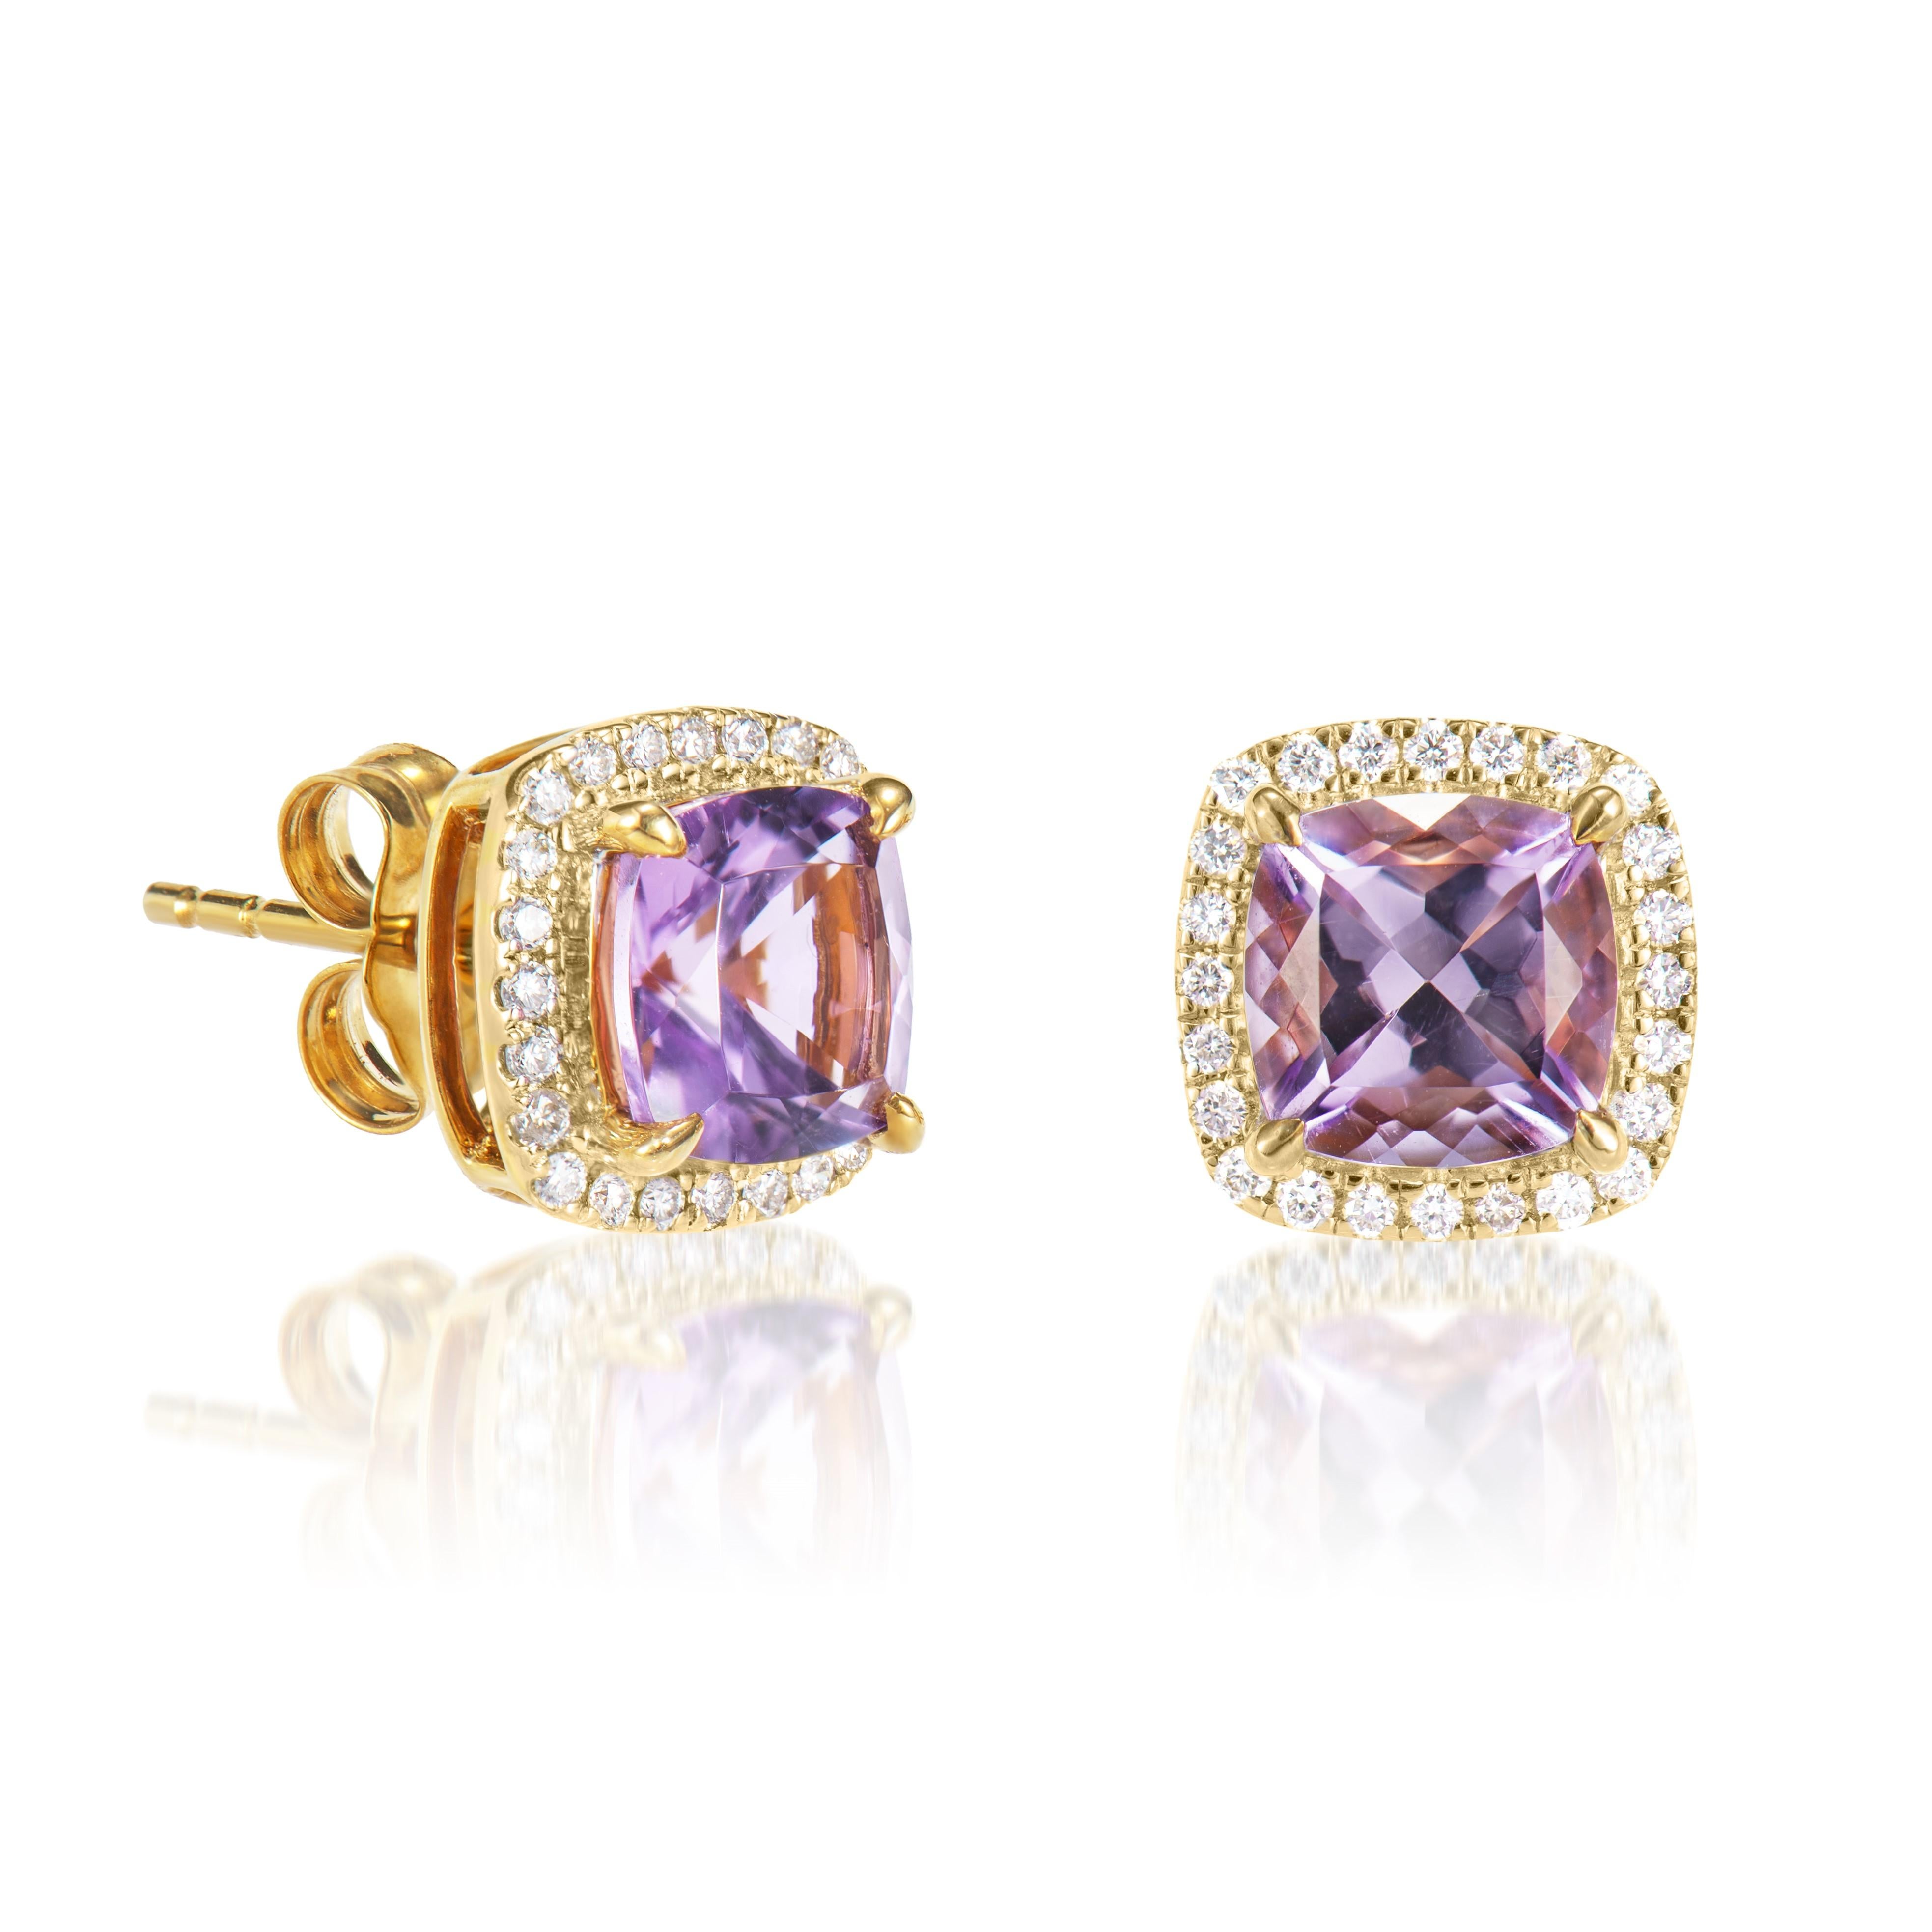 Presented A lovely collection of gems, including Amethyst, Peridot, Rhodolite, Sky Blue Topaz, Swiss Blue Topaz and Morganite is perfect for people who value quality and want to wear it to any occasion or celebration. The yellow gold Amethyst Stud